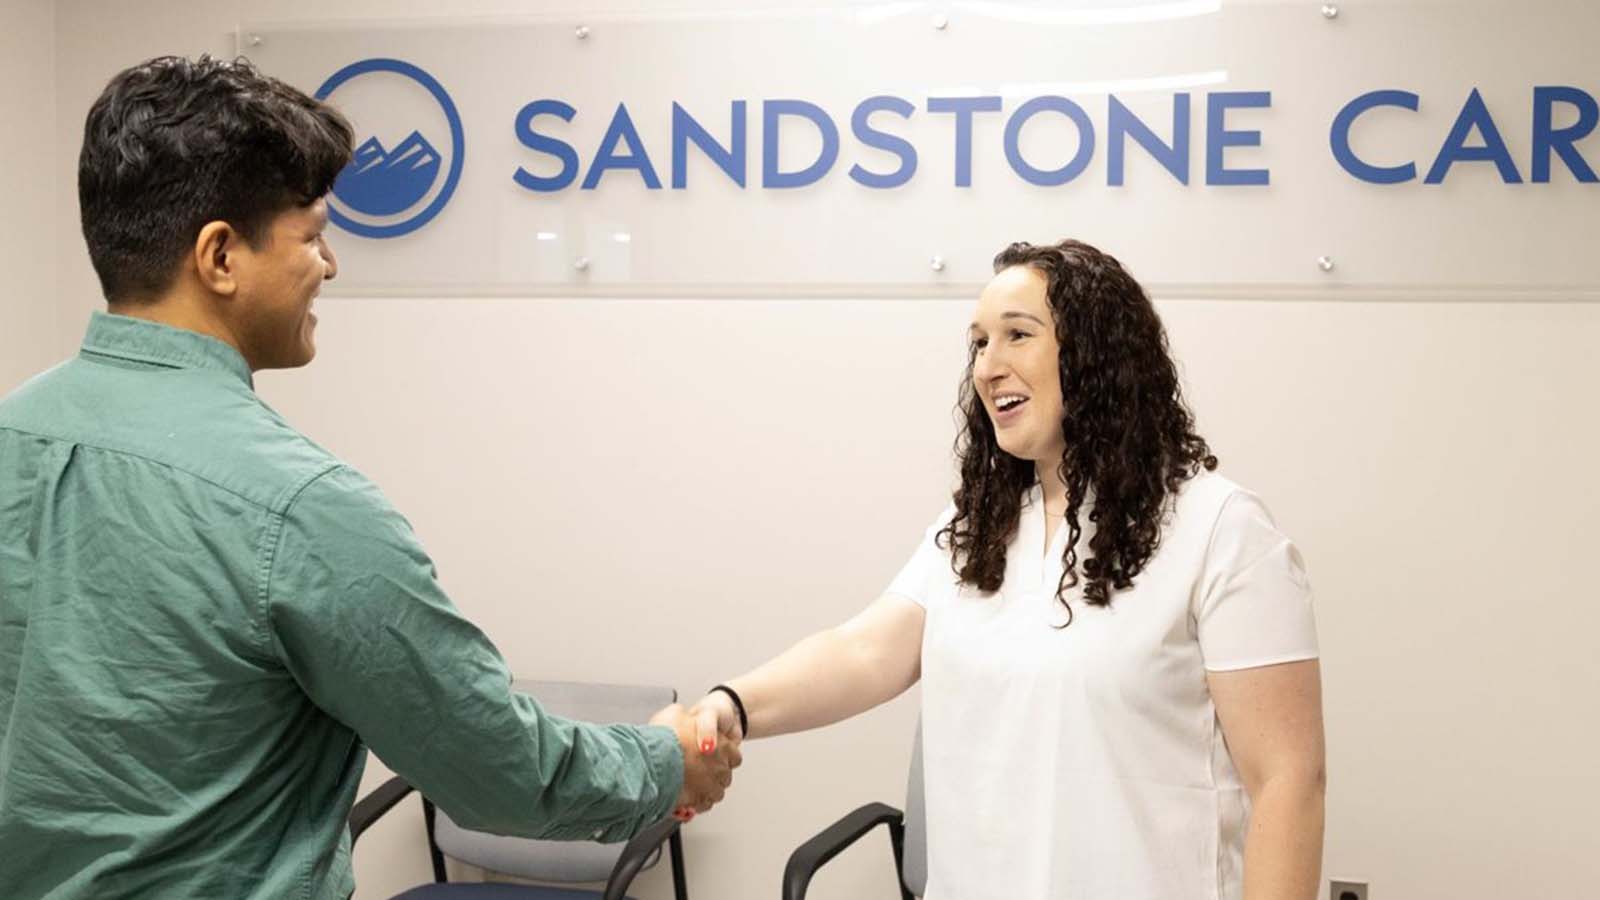 Mental health therapist greeting and shaking hands with new patient in front of Sandstone Care logo.